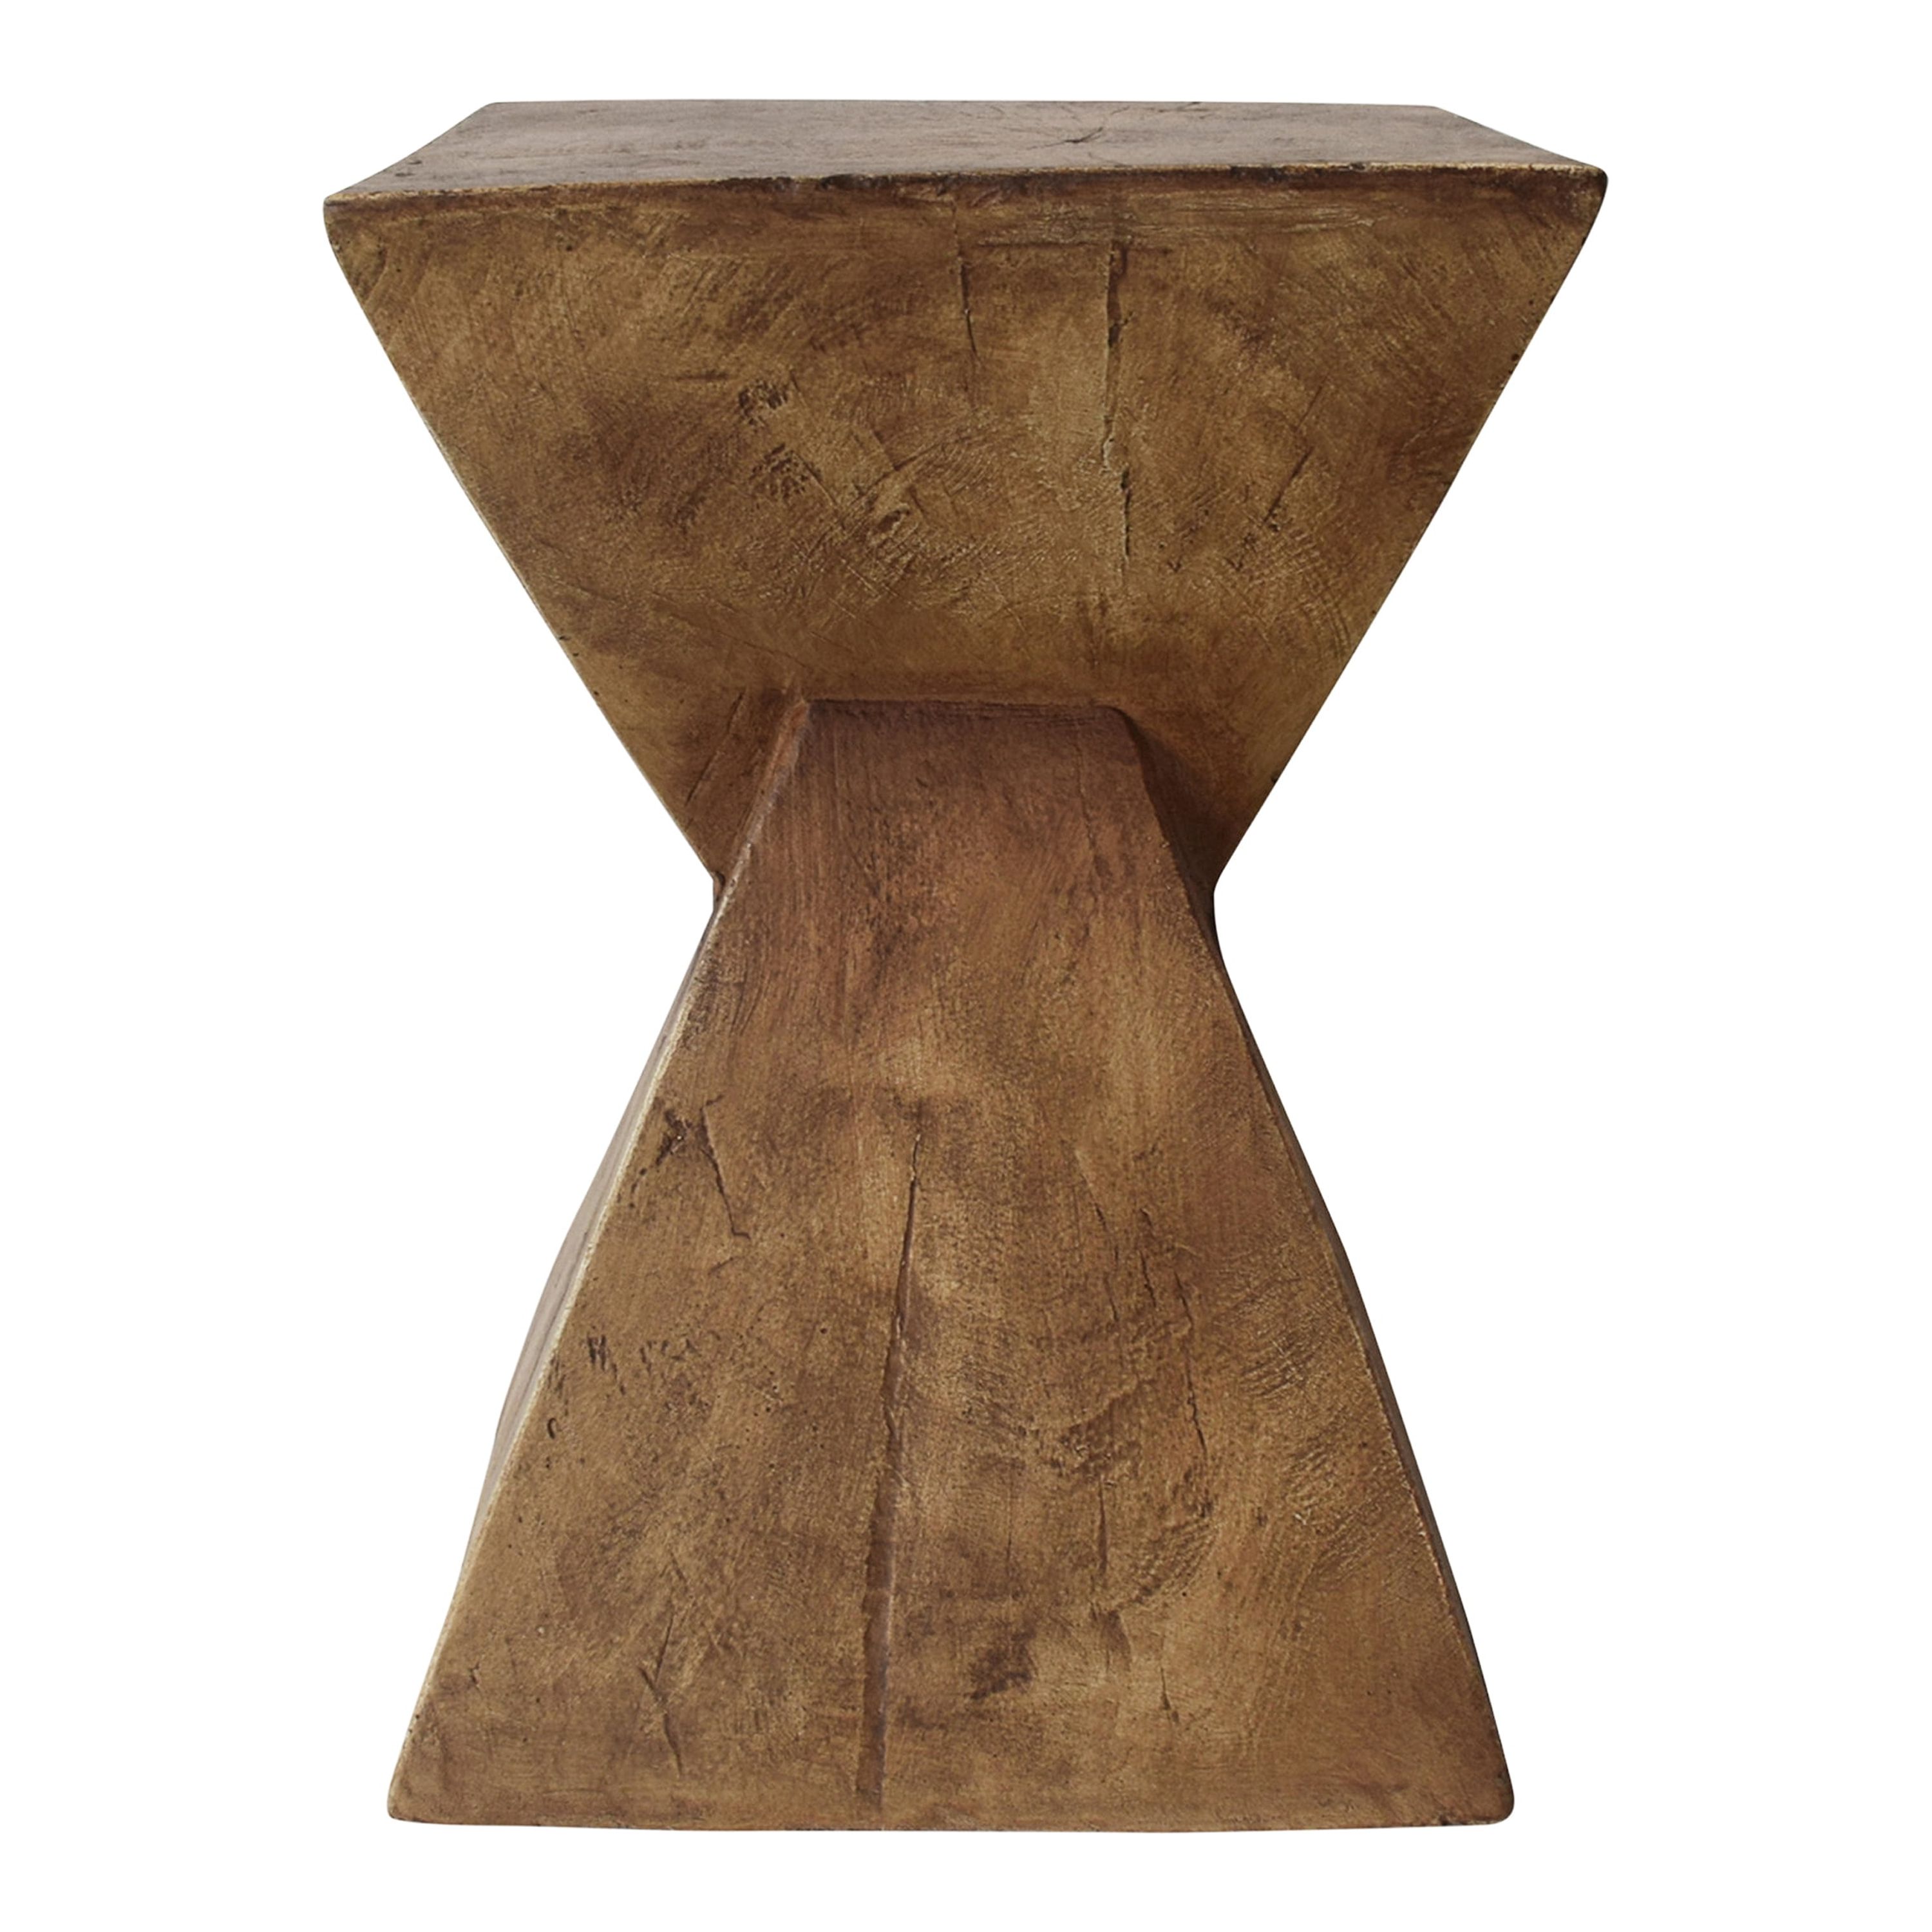 Katie Outdoor Lightweight Concrete Accent Table, Natural - image 1 of 6